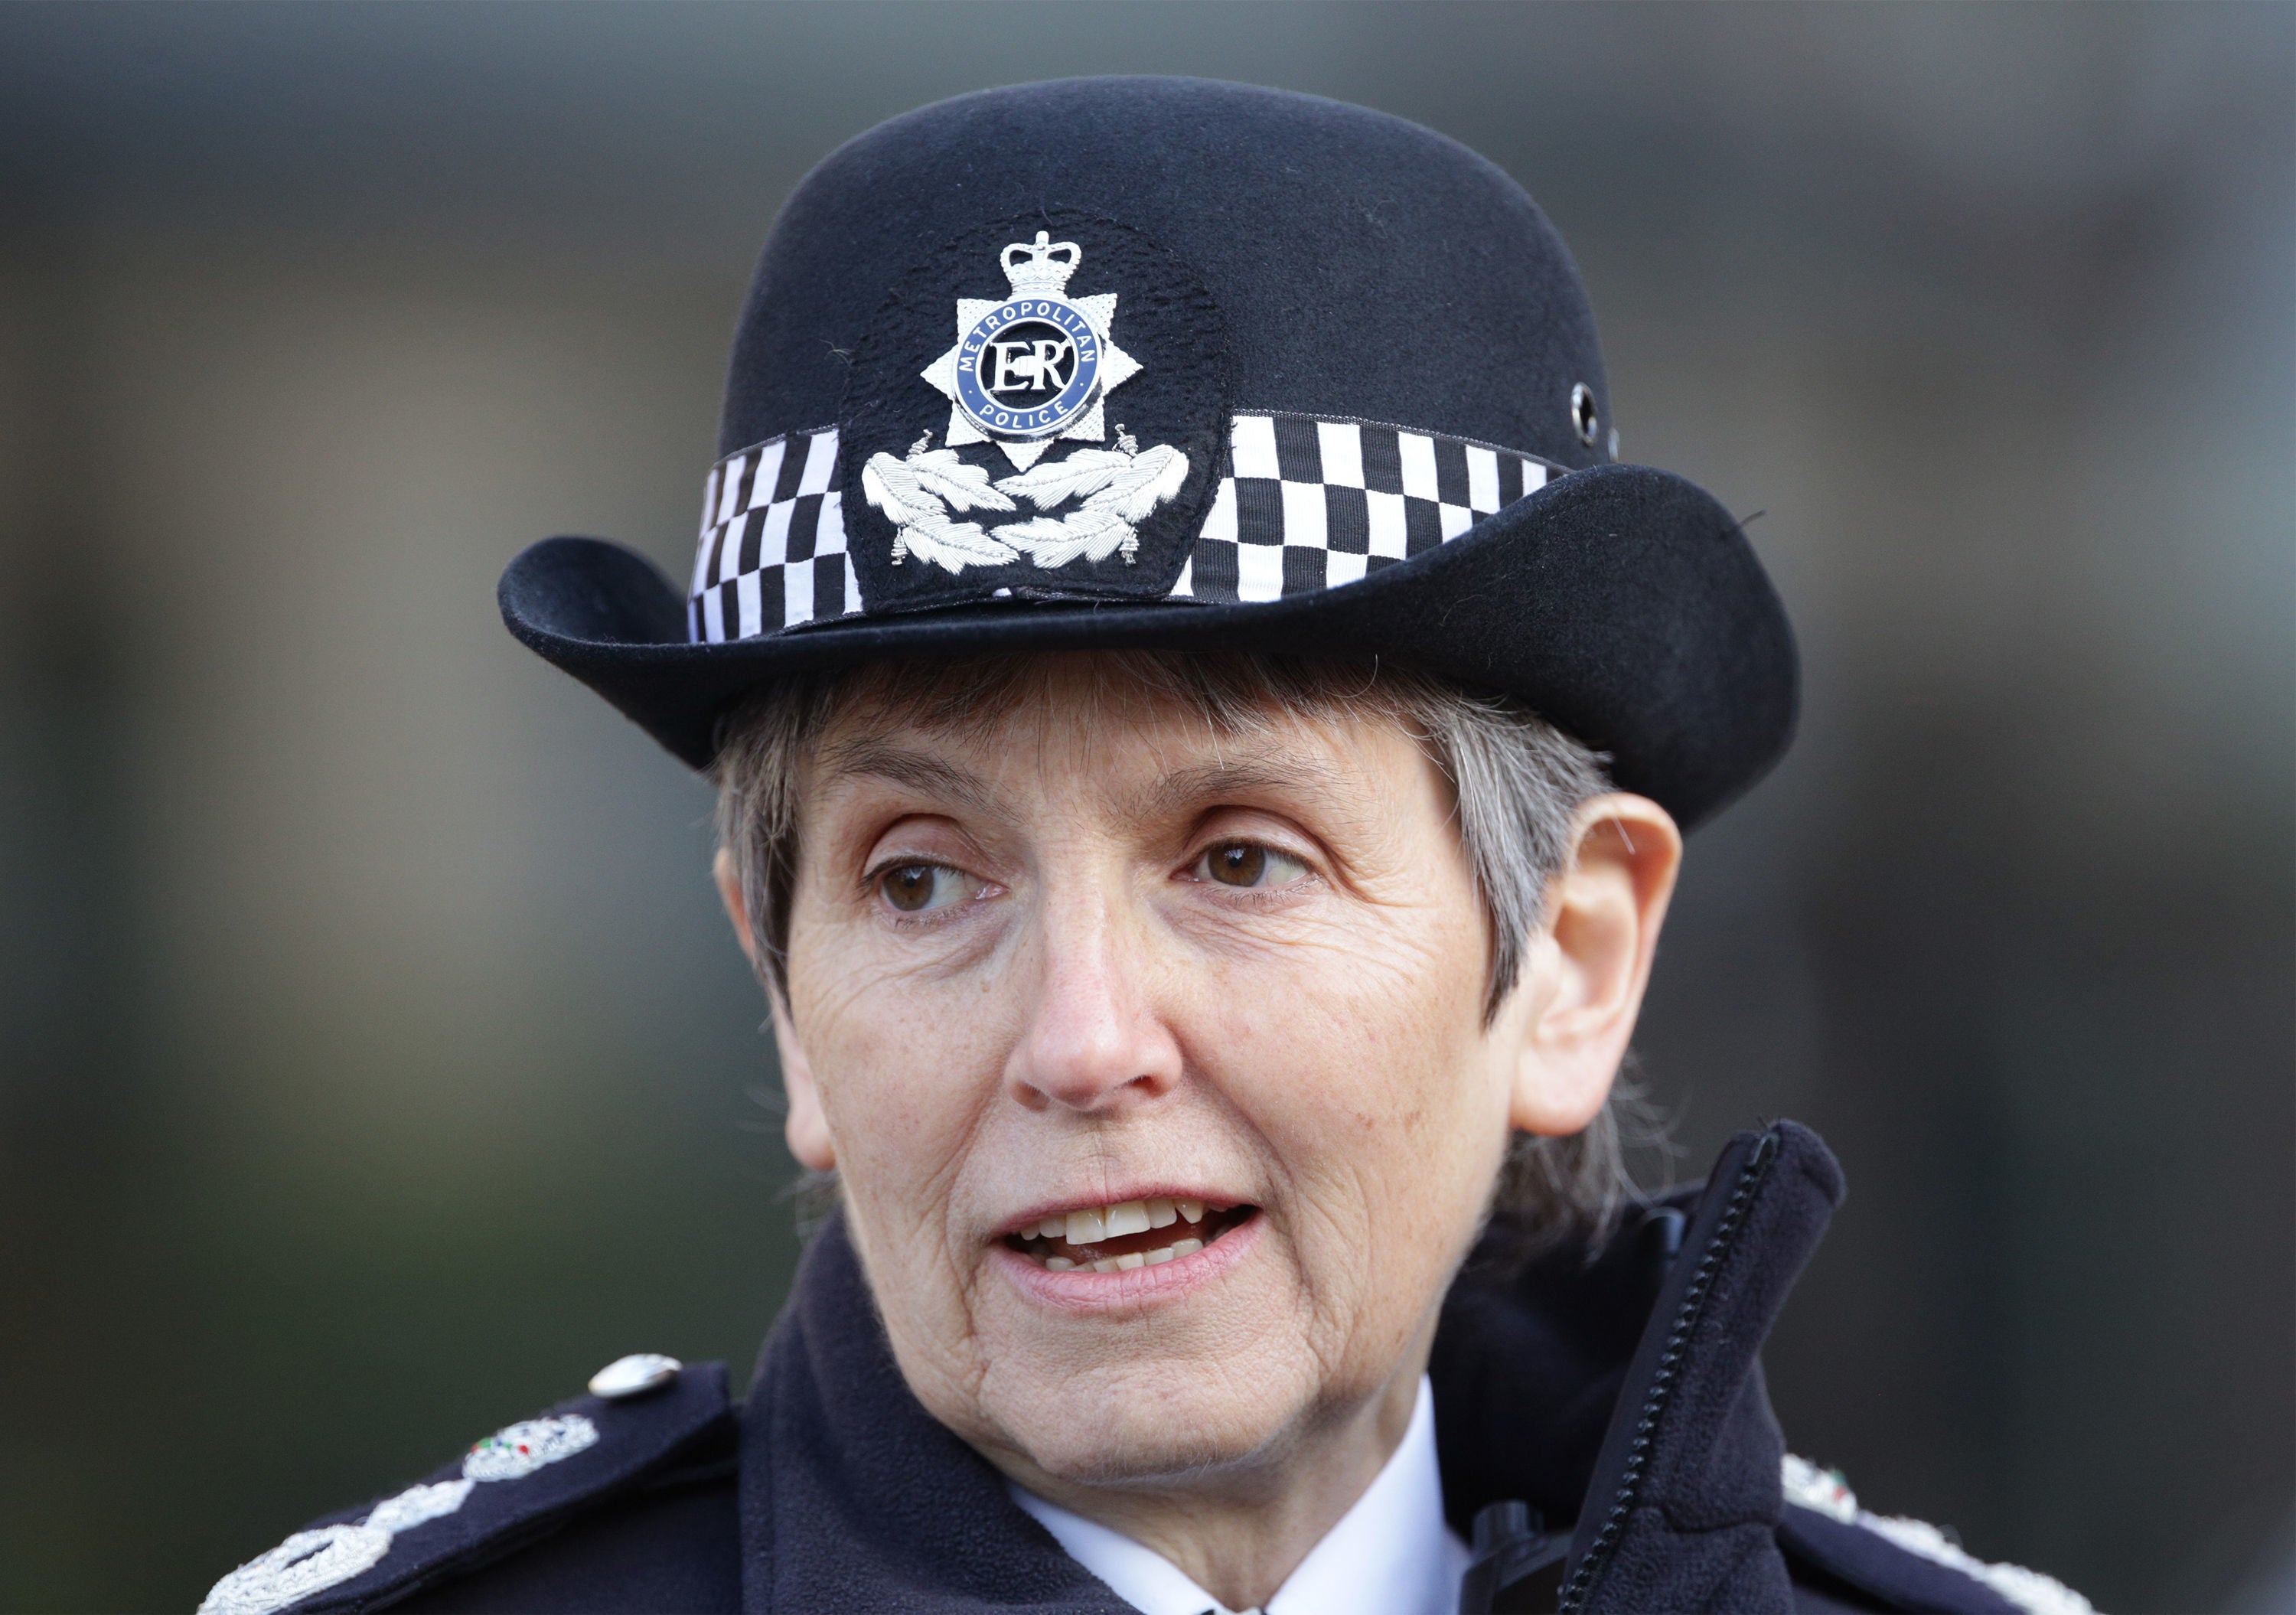 Cressida Dick, the Metropolitan police commissioner, said that “recent events” had heightened “people’s concerns, women’s concerns about violence”